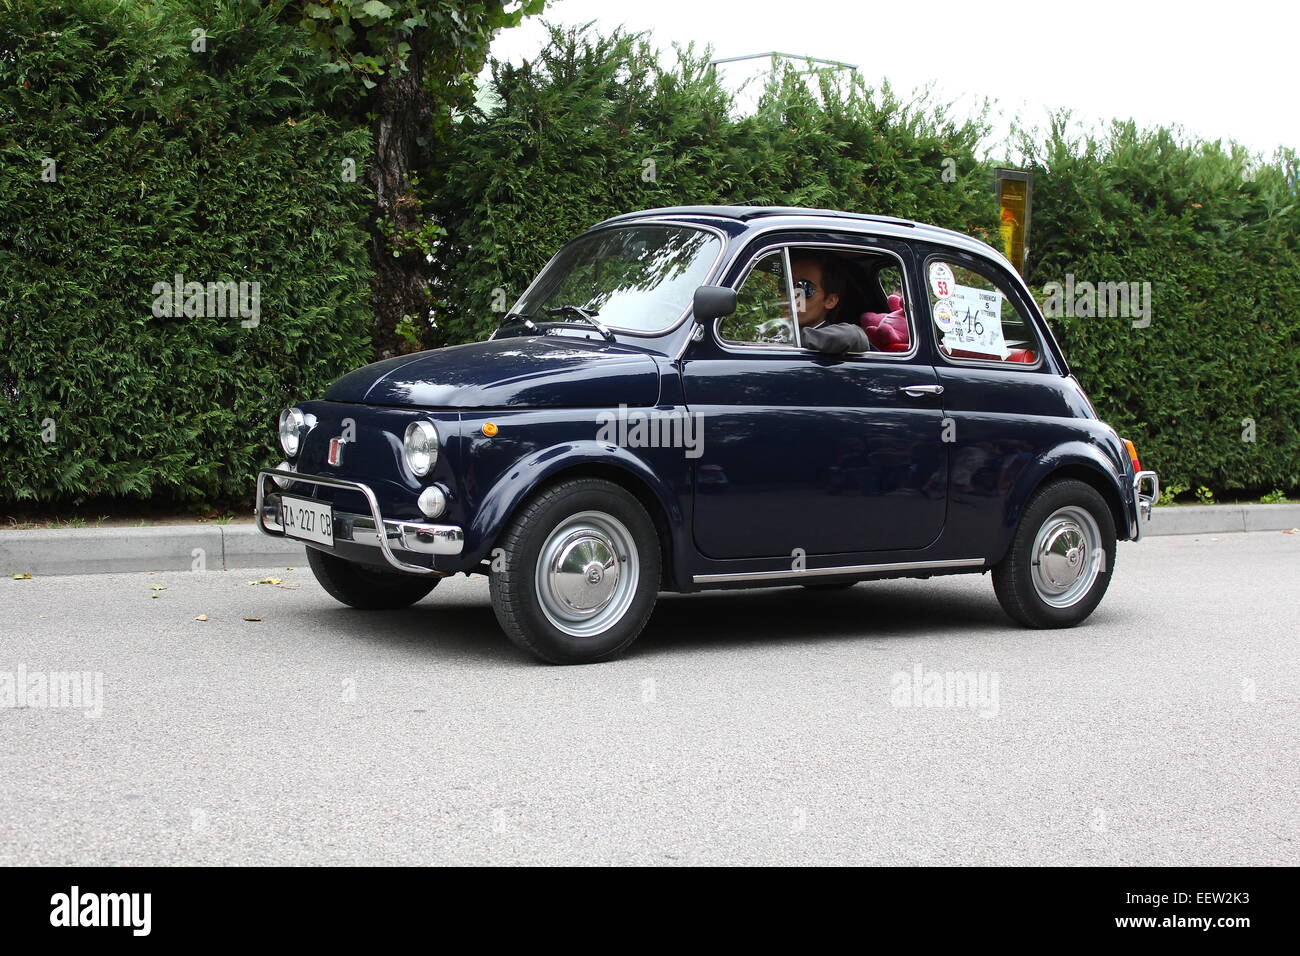 Black Fiat 500 during a Fiat 500 carshow in Cavallino Treporti, Italy Stock Photo